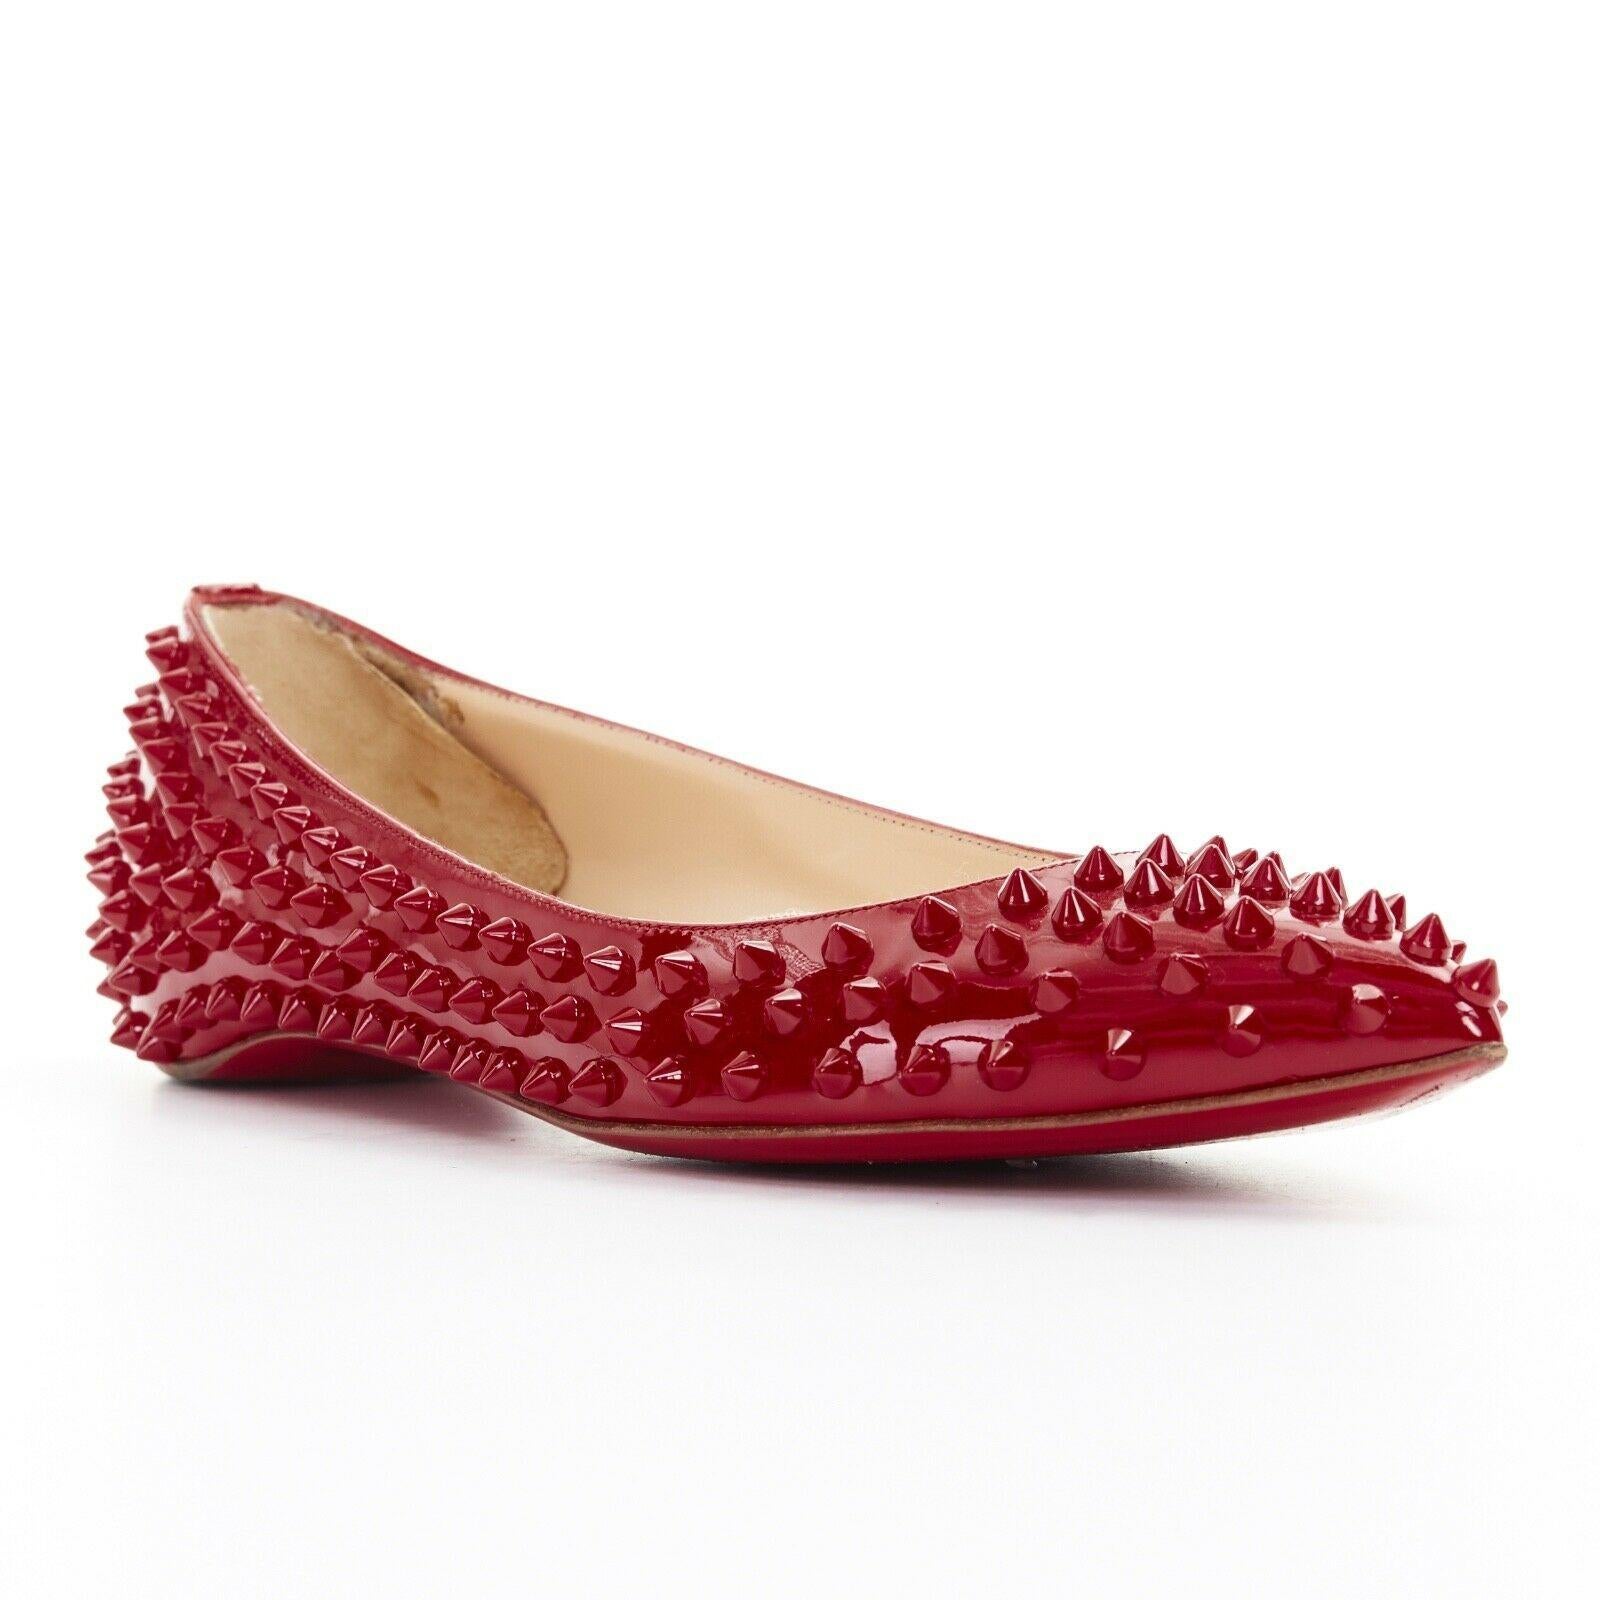 CHRISTIAN LOUBOUTIN Pigalle Spikes red patent studded pointy flats EU38.5
CHRISTIAN LOUBOUTINPigalle Spikes. 
Red patent leather with tonal spike stud allover embellishment. 
Pointed toe. Slip on. Padded tan leather lining. 
Signature red lacquered